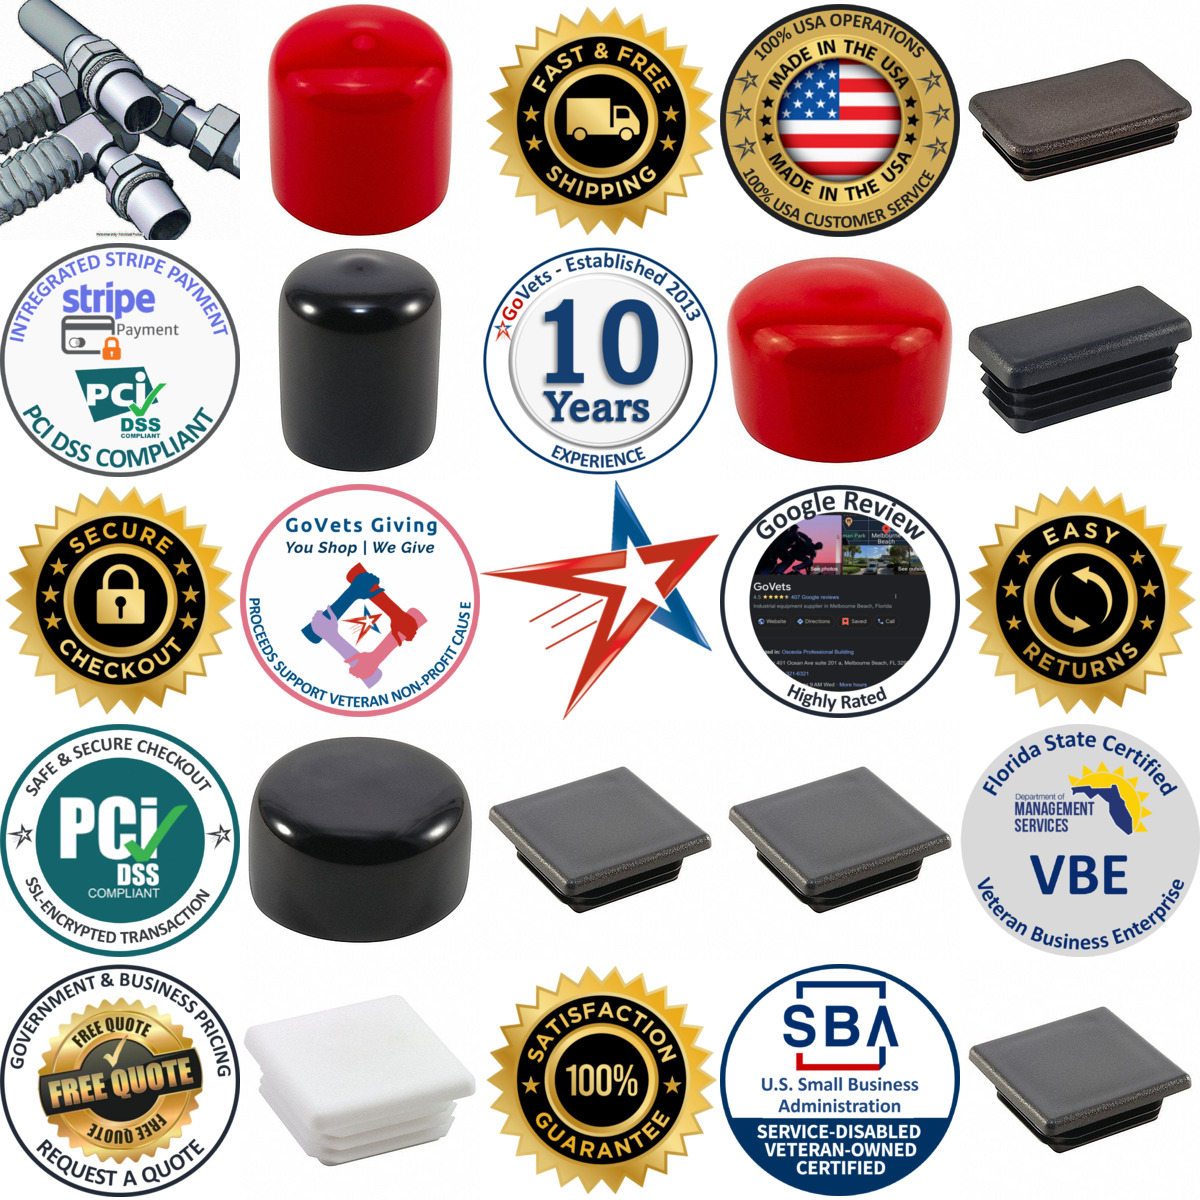 A selection of Tubing Plugs products on GoVets